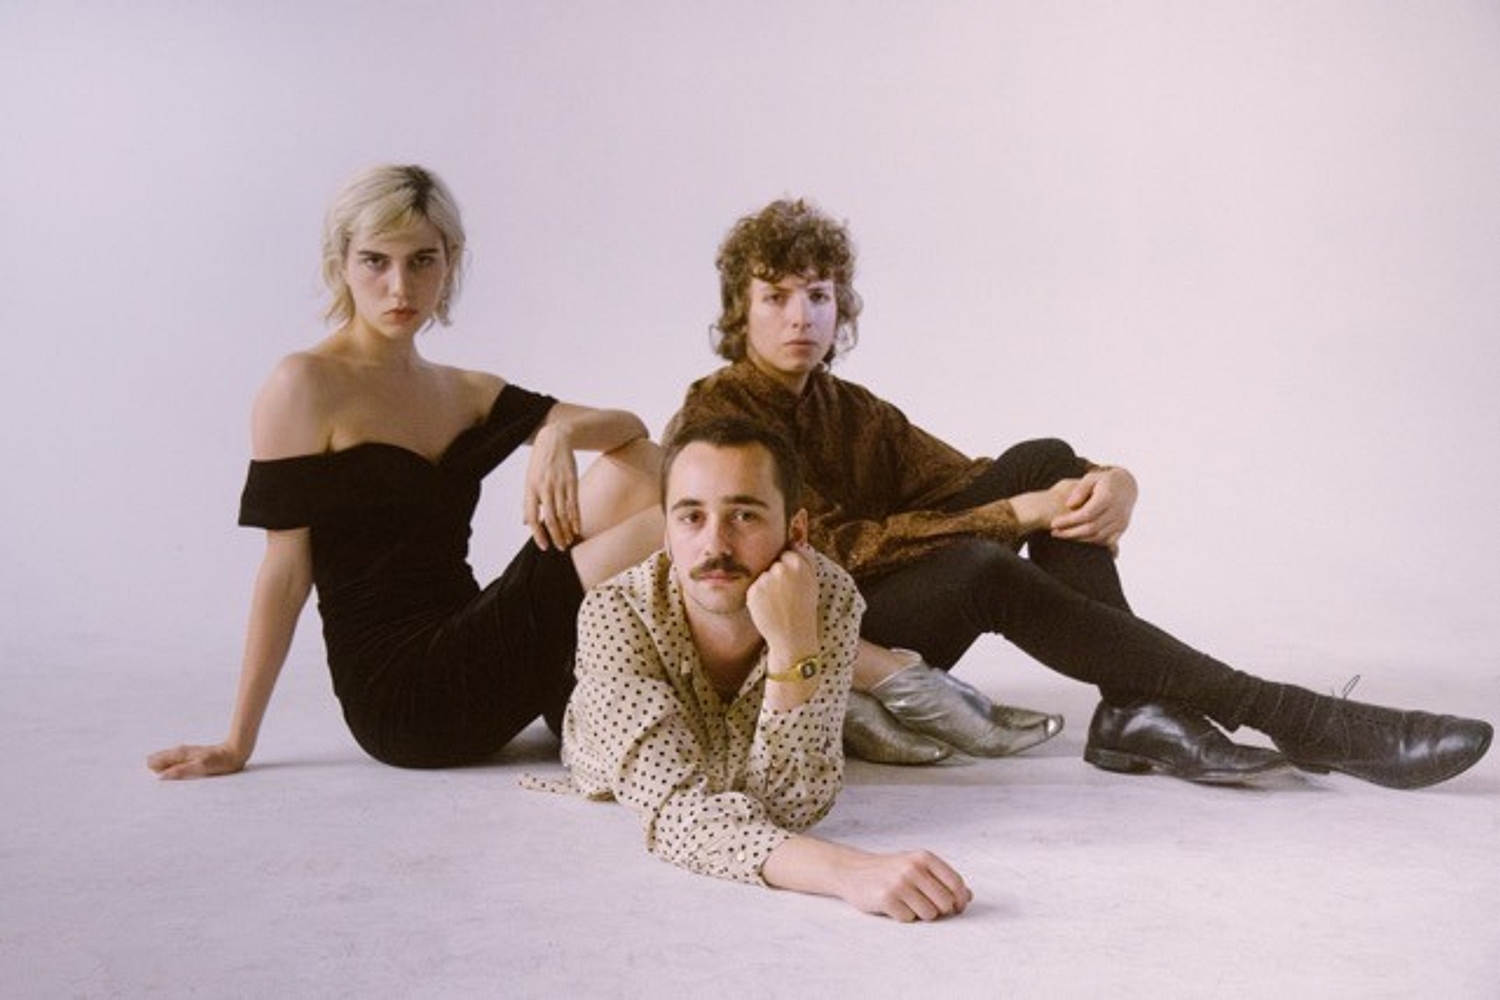 Sunflower Bean reveal new track ‘I Was A Fool’, announce UK tour for 2018